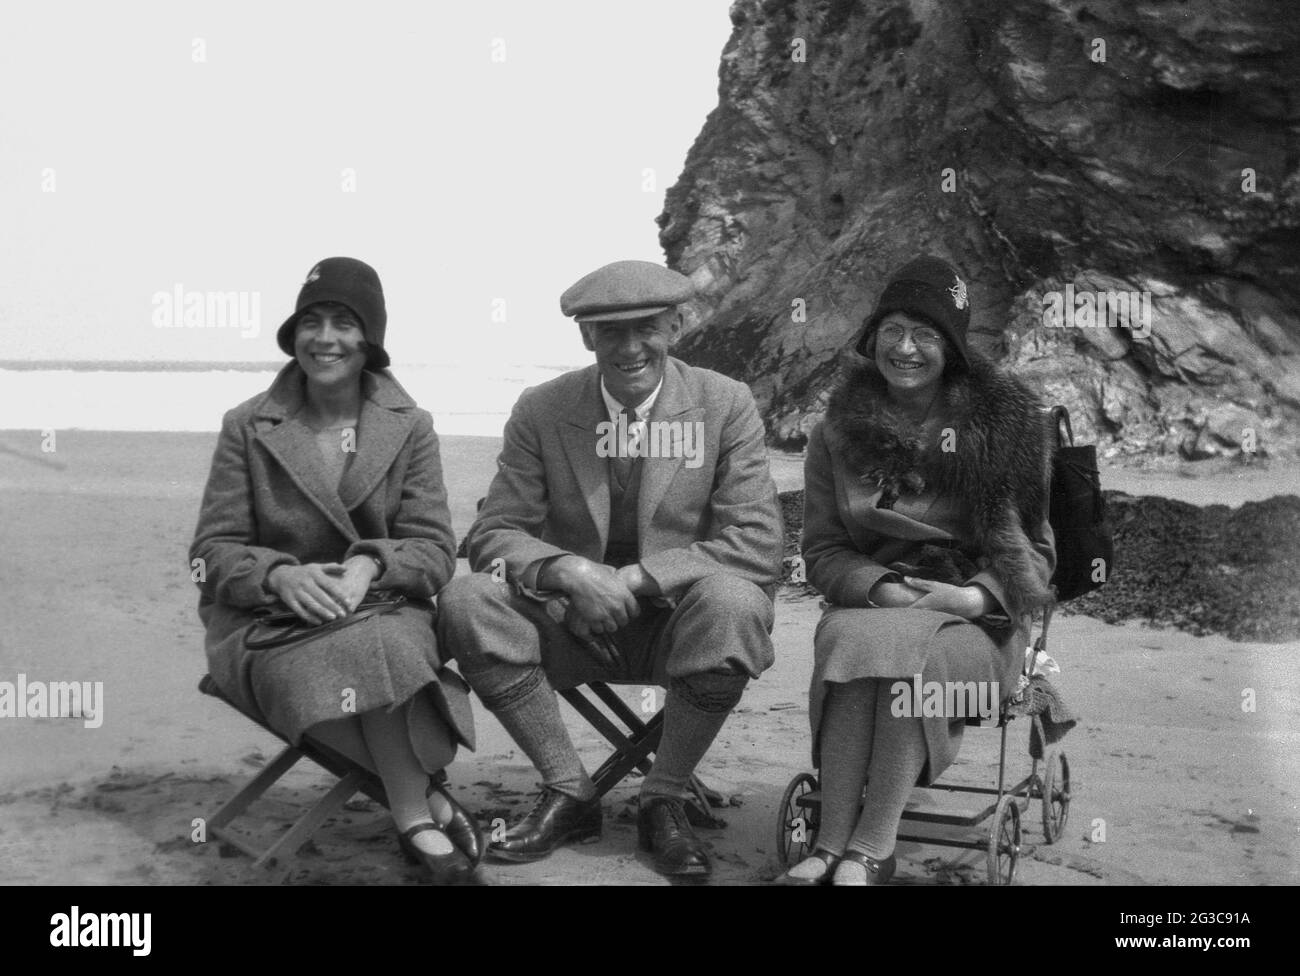 1930s, historical, all smiles as an English gentleman and two ladies sit beside each other on small stools on a beach in England, UK, wearing the formal clothing of the era for a photo. The two women are in coats and the hats of the day, while the man is wearing plus fours, jacket & tie and a wide cloth cap. Stock Photo